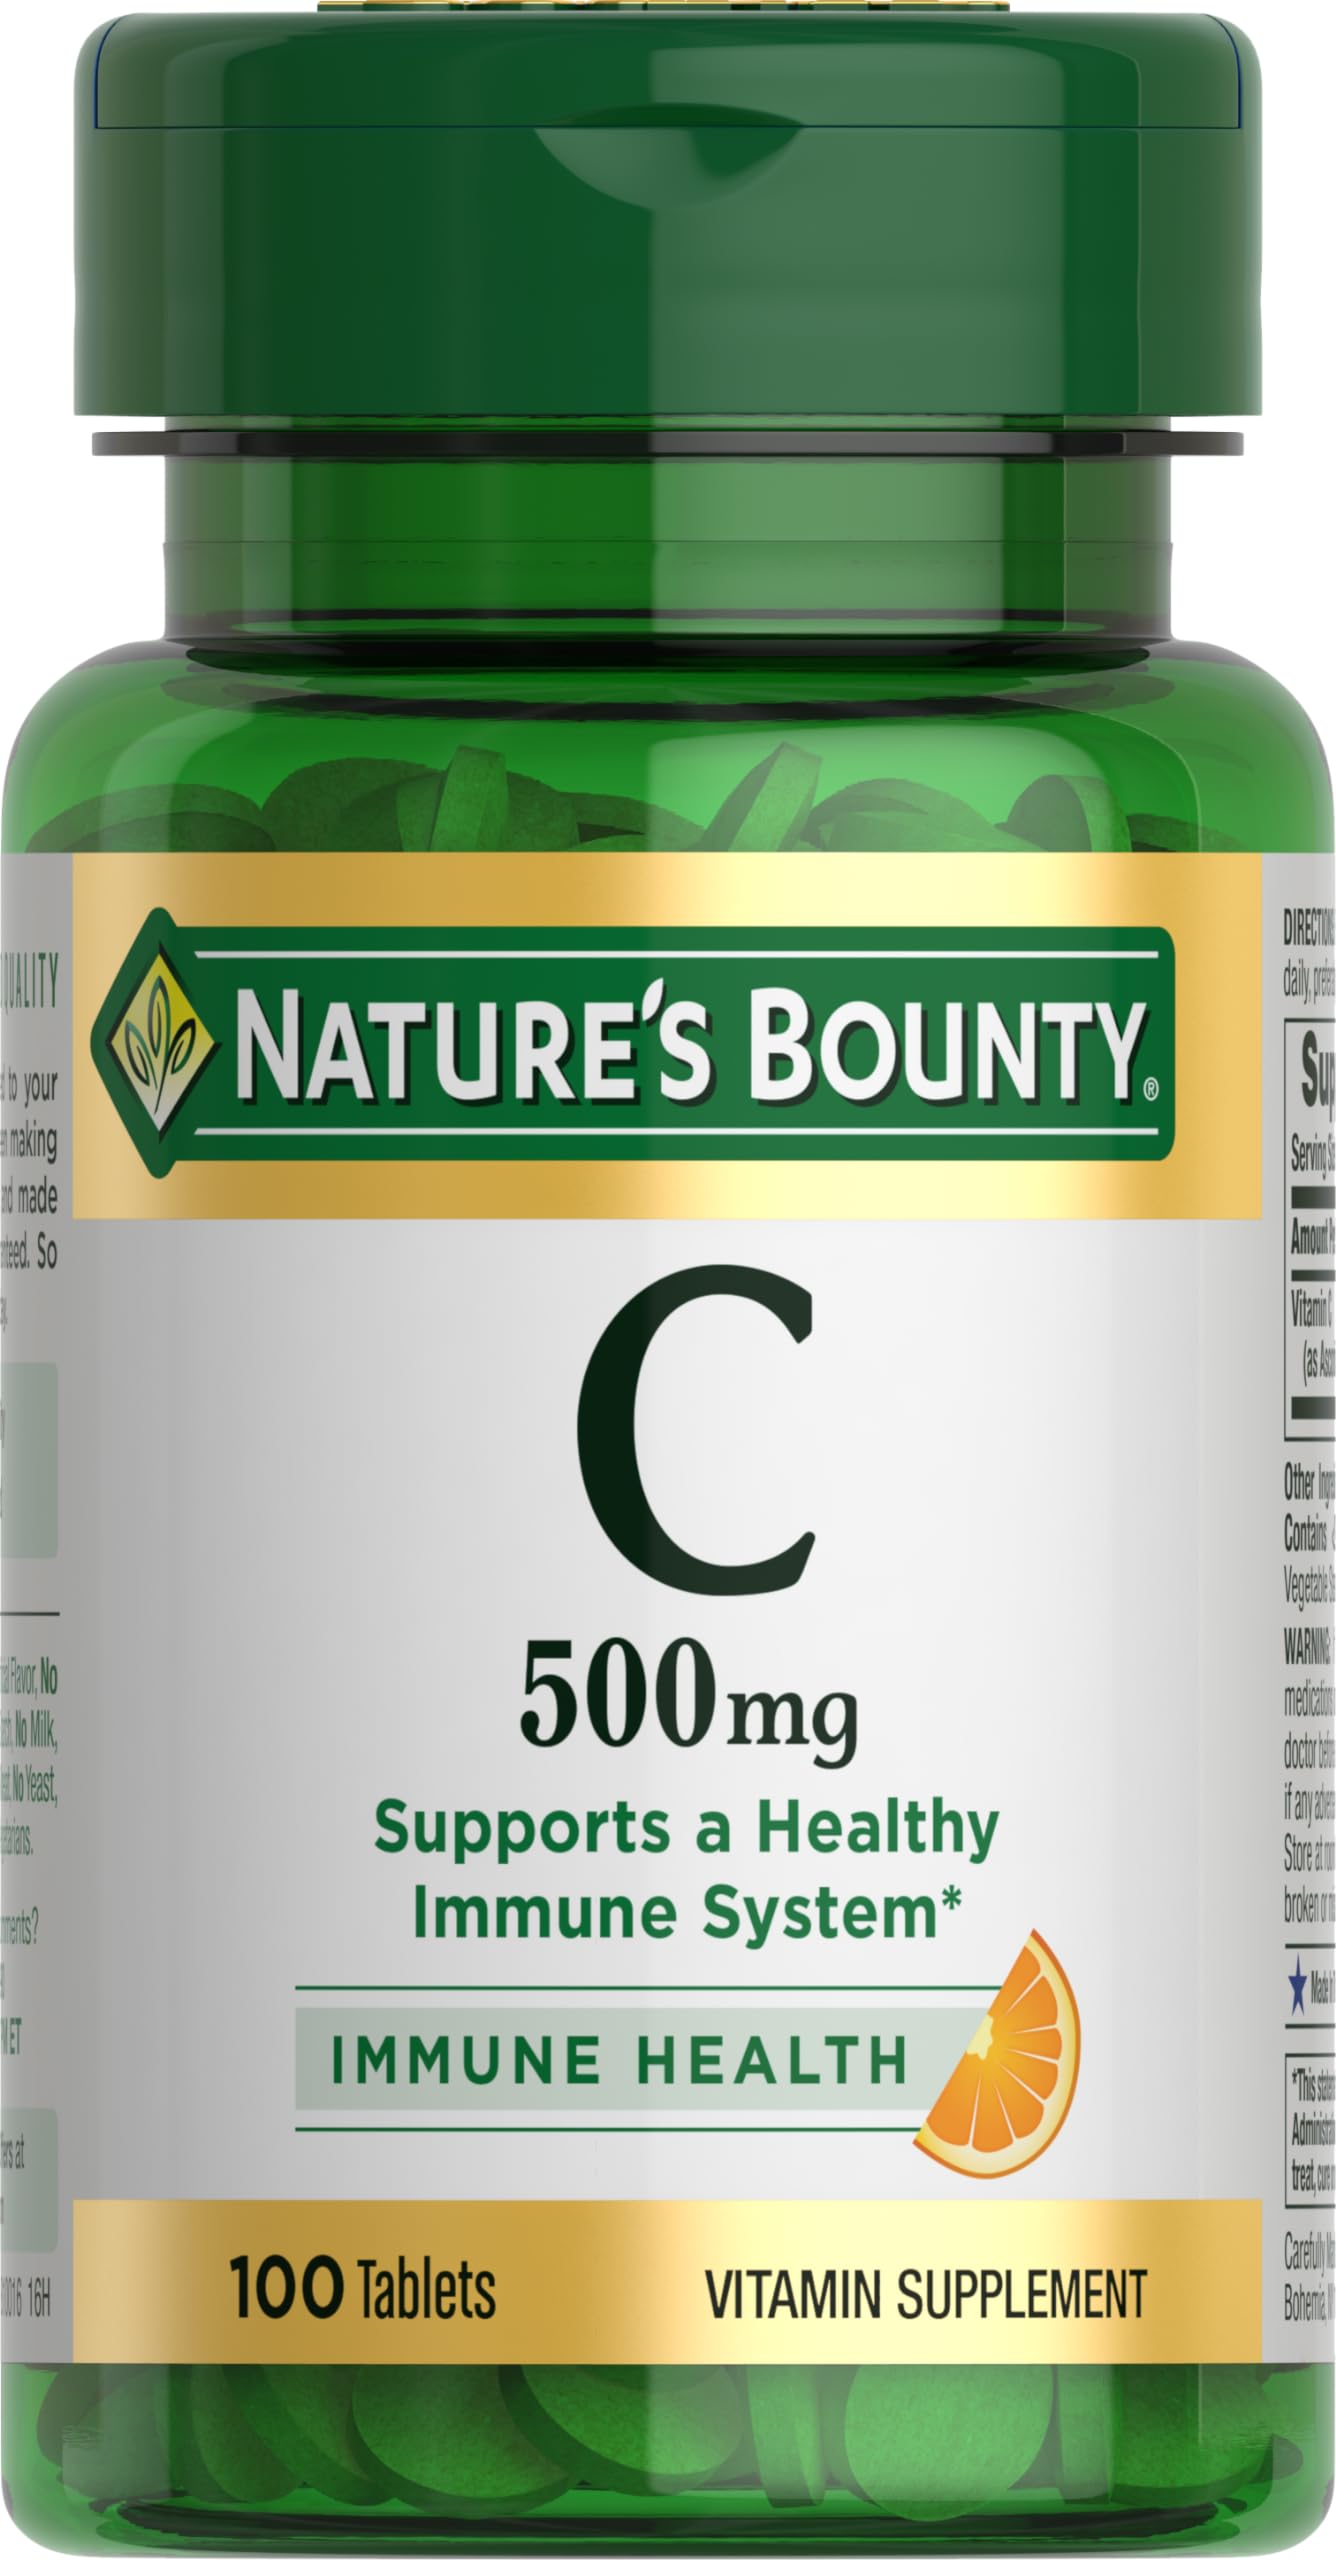 2 for $4.49 w/ S&S: 100-Count Nature's Bounty Vitamin C 500mg Tablets